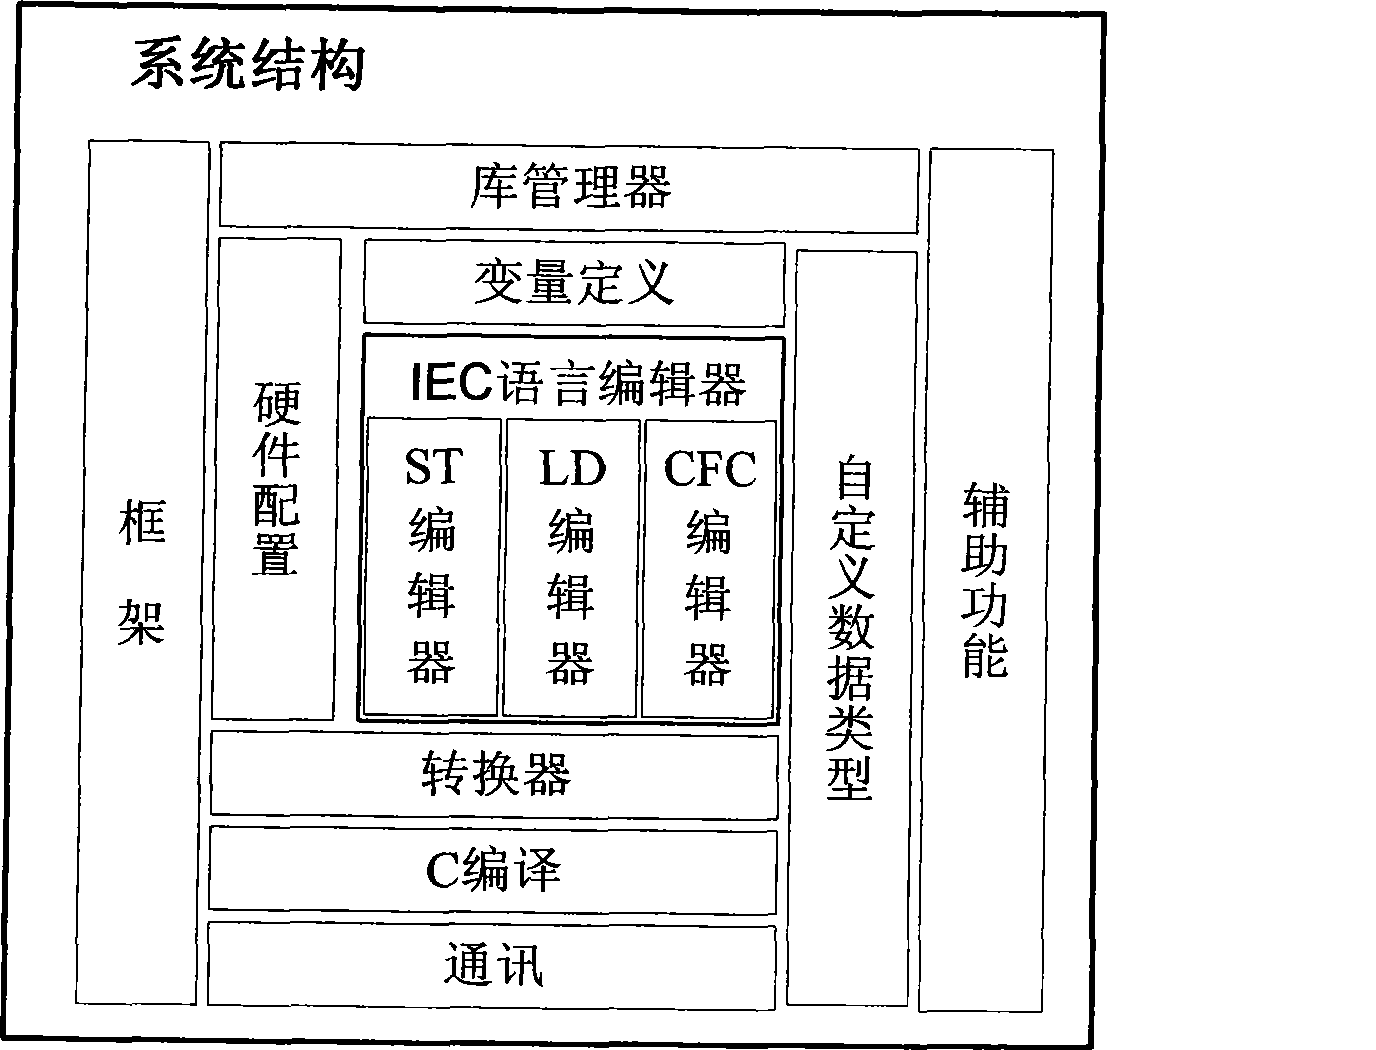 Method and converter for converting high level language to other high level languages